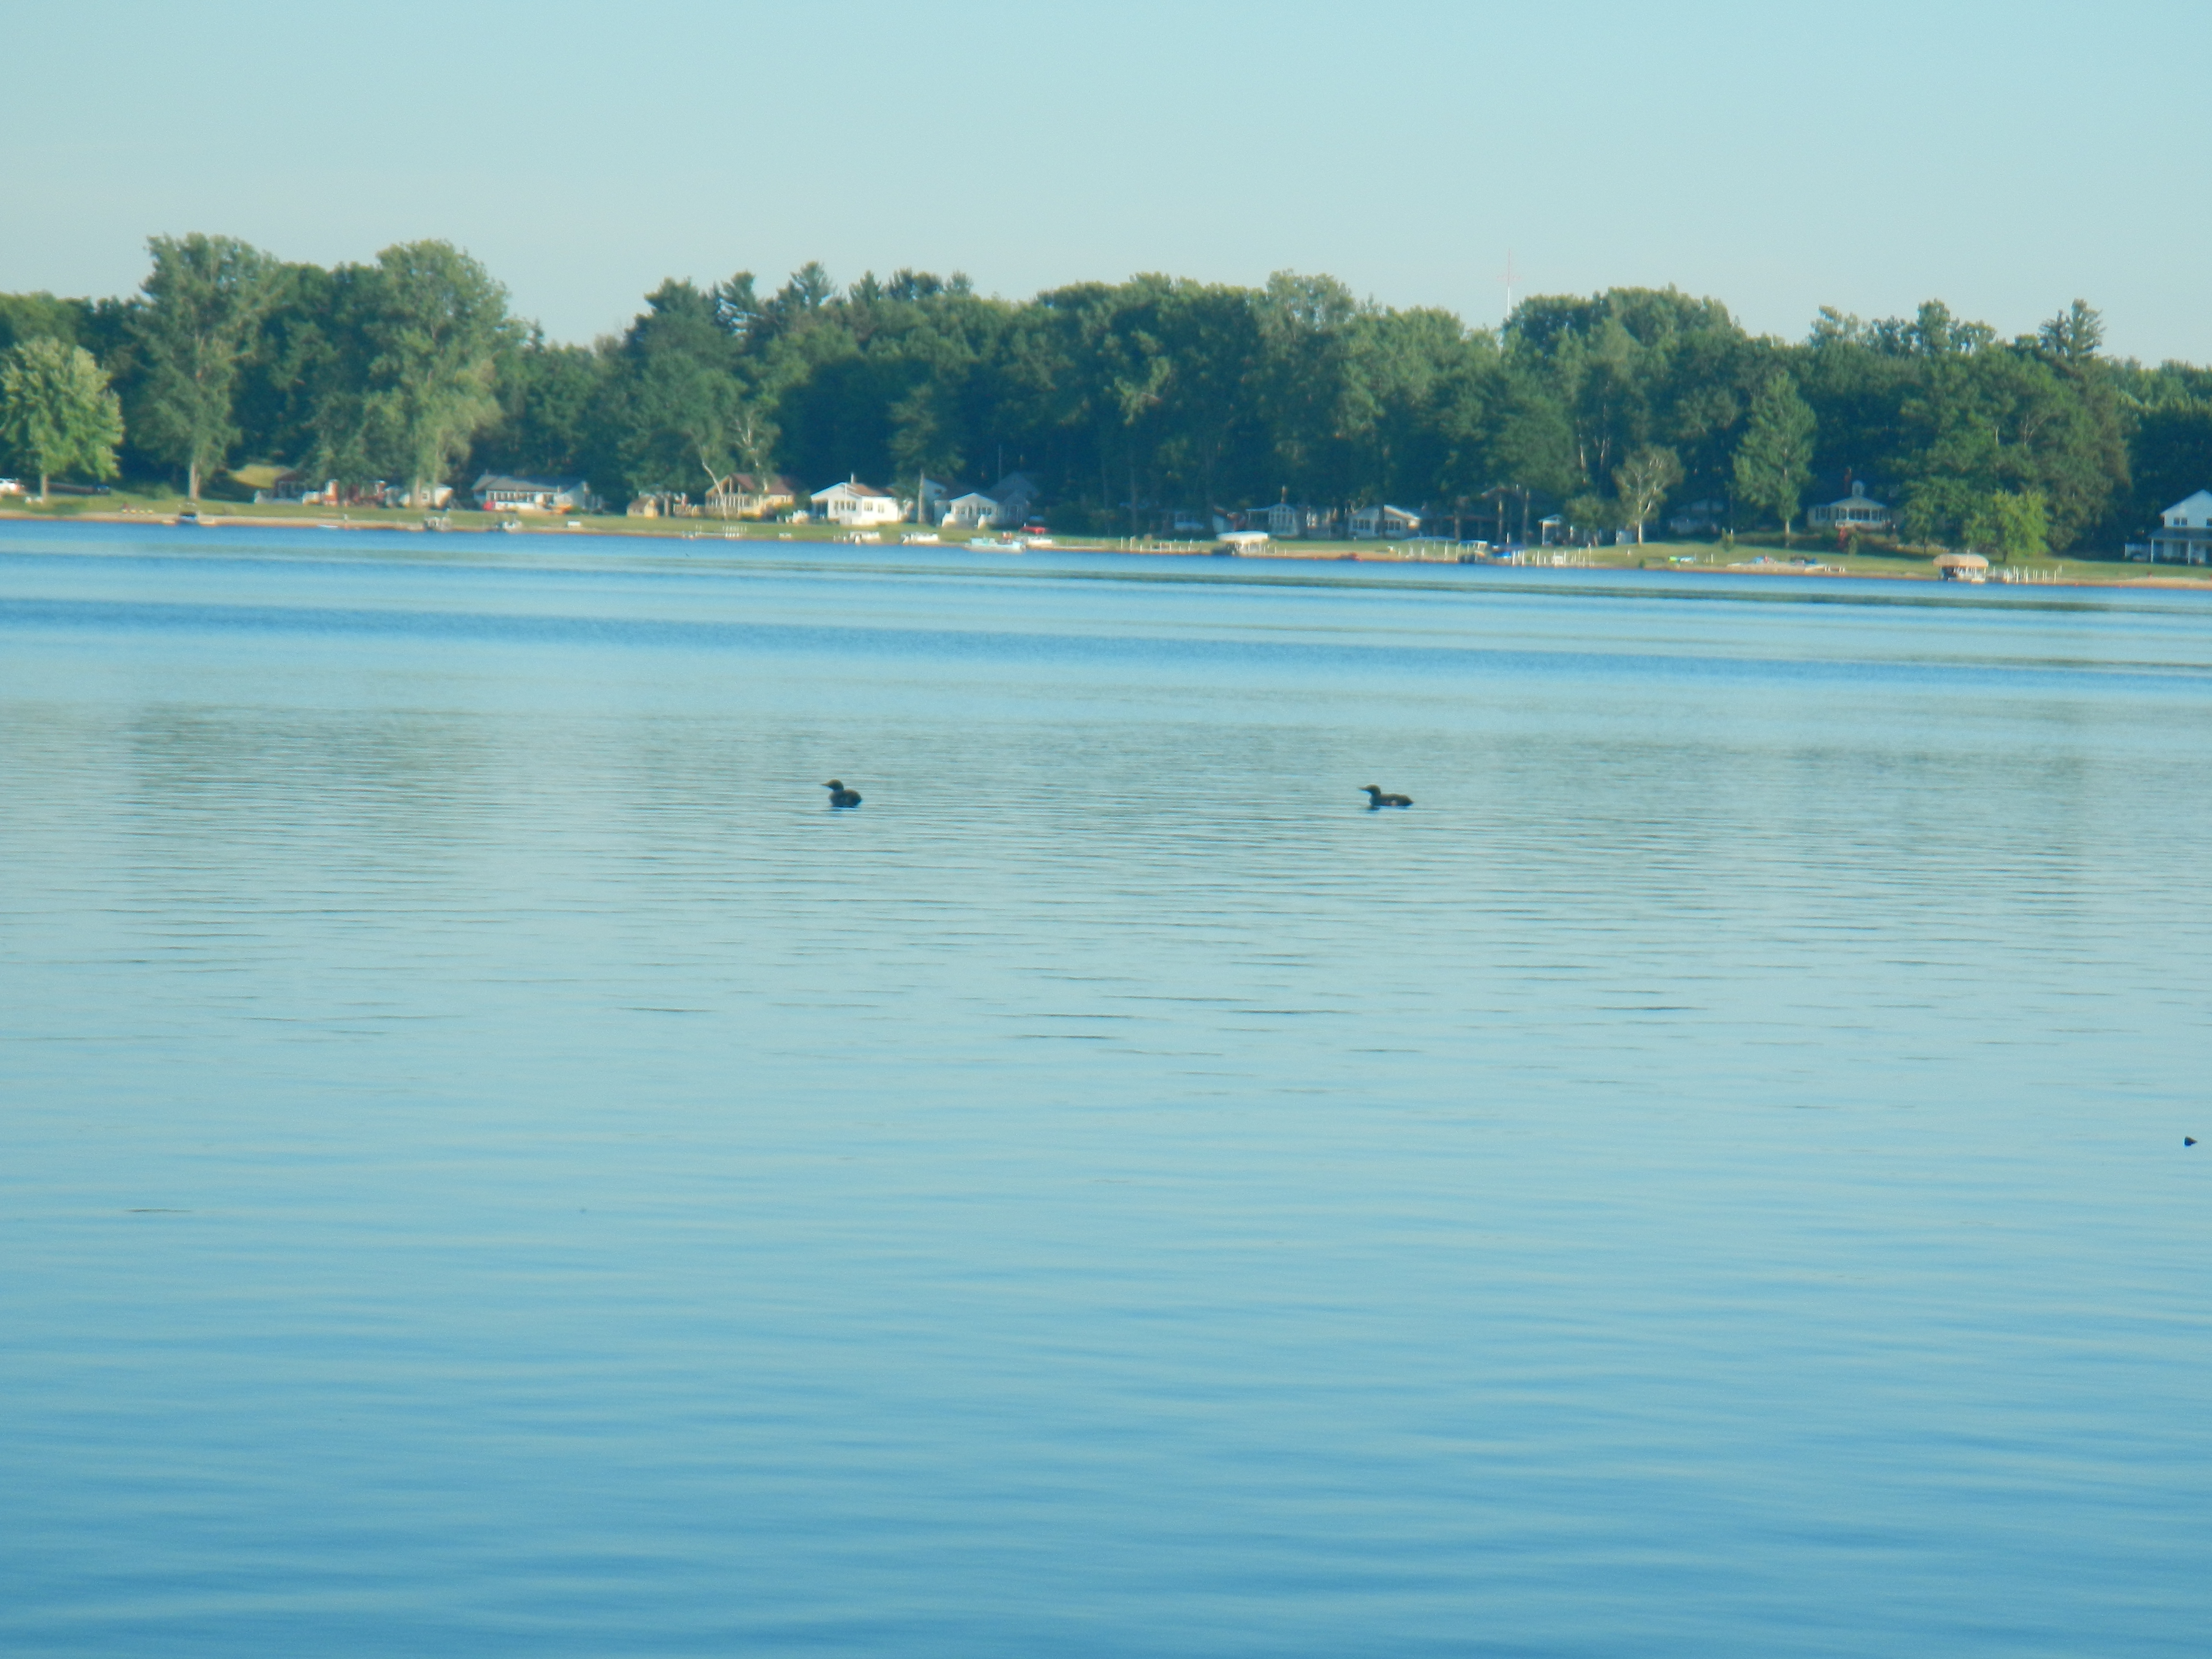 Loons on Cowden Lake